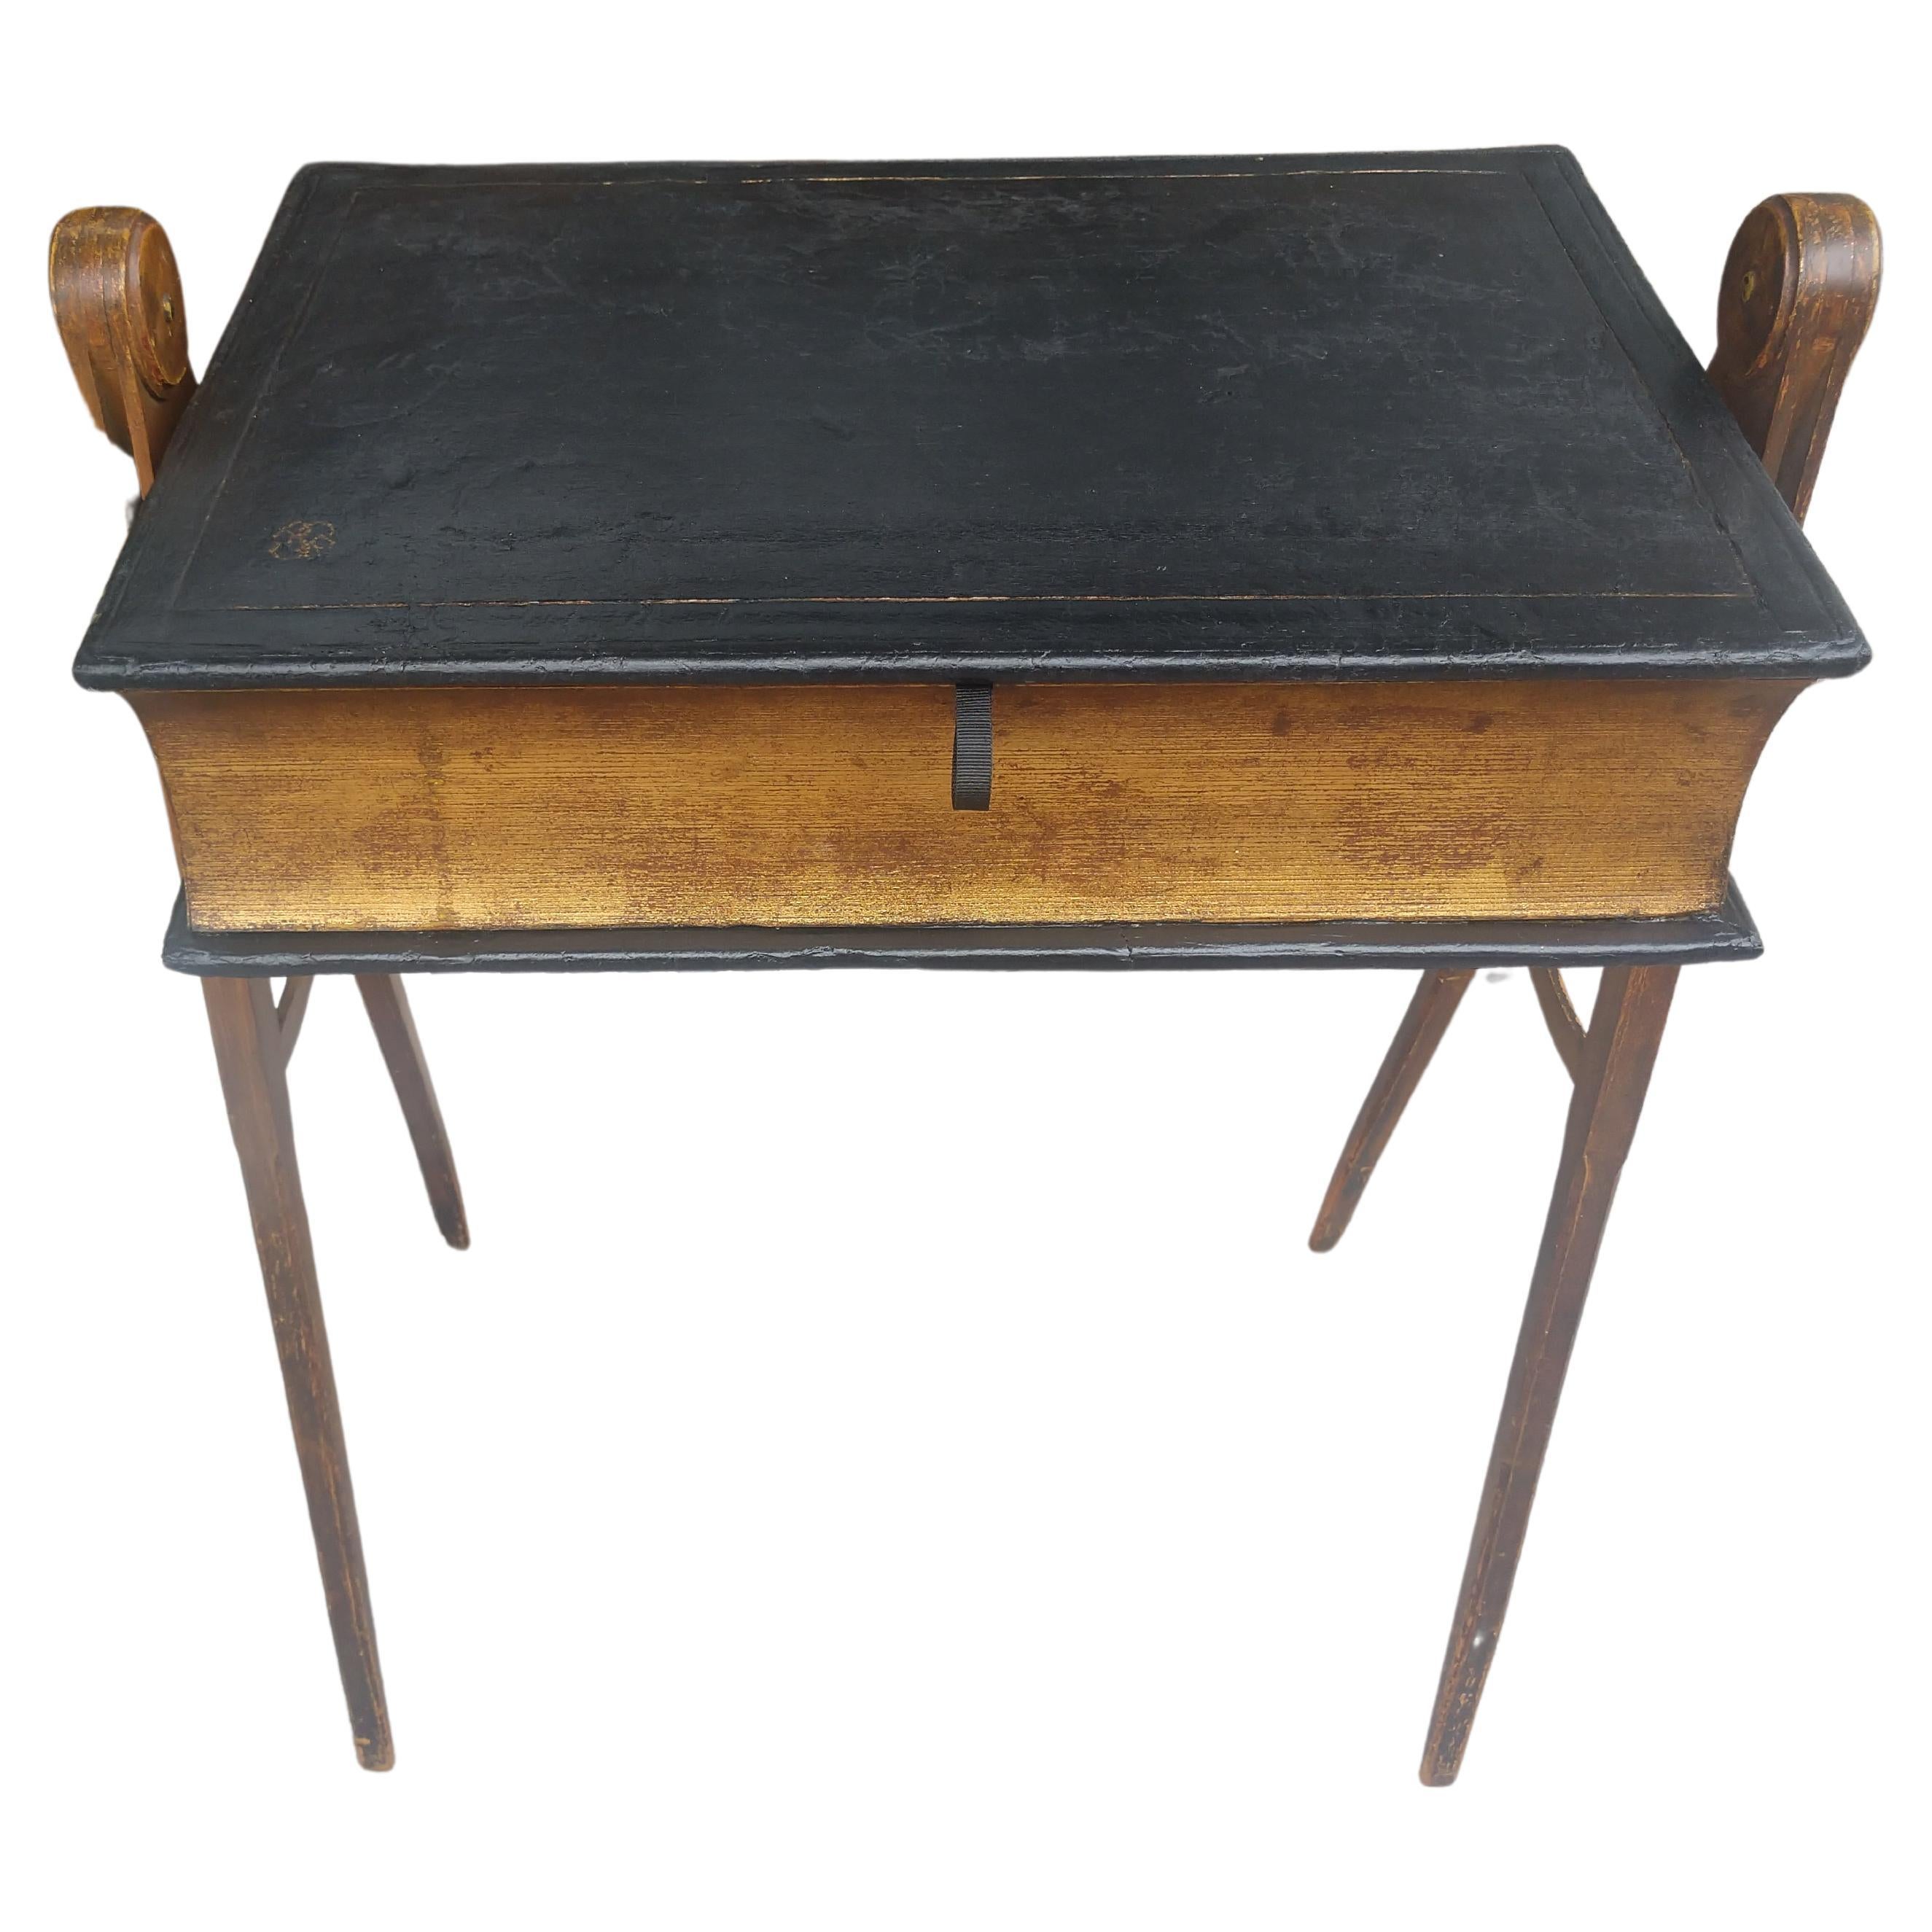 Hand-Carved 19th Century Masonic Table with Leather Bible Compartment Flip Lid Compass Legs For Sale